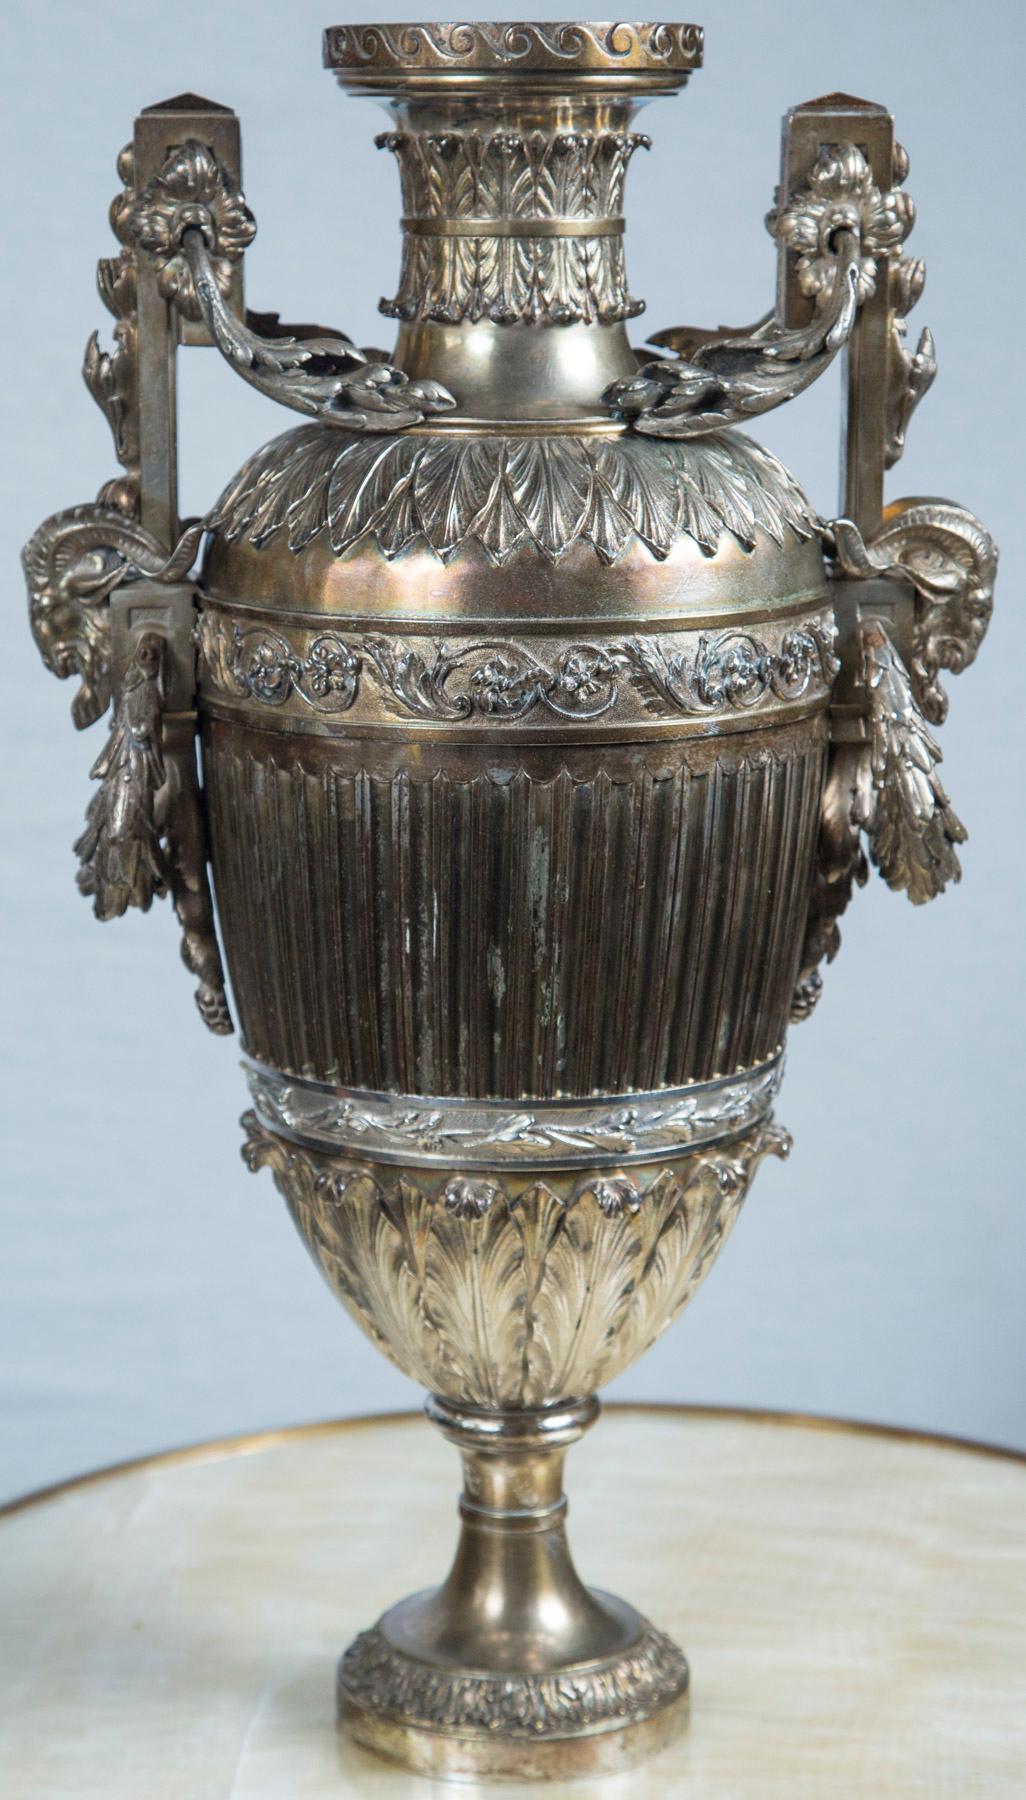 Probably Russian, 18th-19th century. Z marks on handles. Rams heads with laurel wreaths. Winged head of a female on centre of one side. Decorated with laurel leaves and swags. Cast in two parts, handles cast separately.